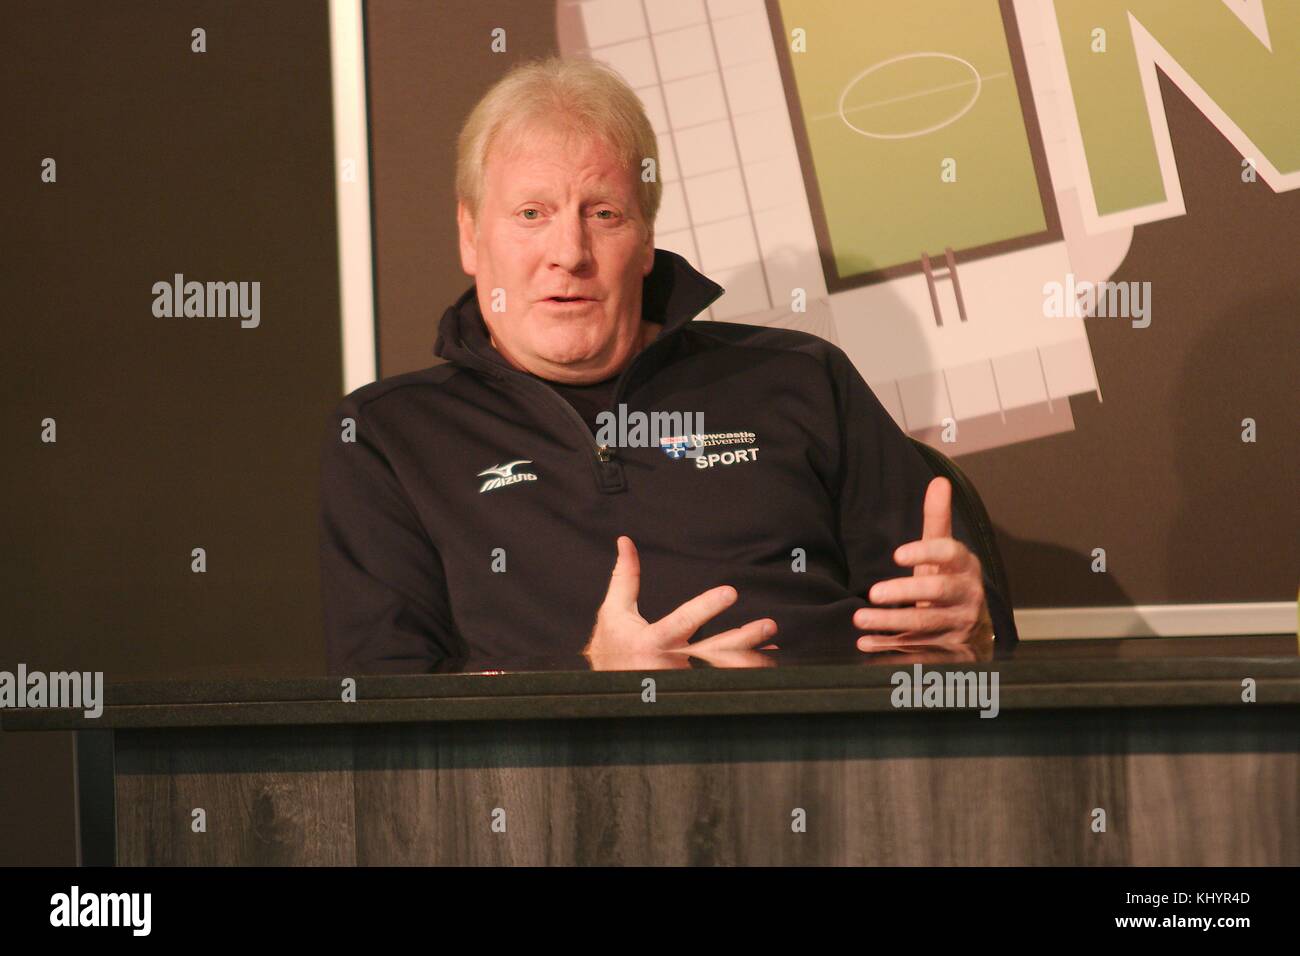 Newcastle upon Tyne, England, 21 November 2017. Matthew Carter, Director of Rugby, Newcastle University speaking at the press conference to announce The Big One, a day of rugby featuring Northumbria University playing Newcastle University followed by Newcastle Falcons against Northampton Saints in the Aviva Premiership at St James Park in March 2018. Credit: Colin Edwards/Alamy Live News. Stock Photo